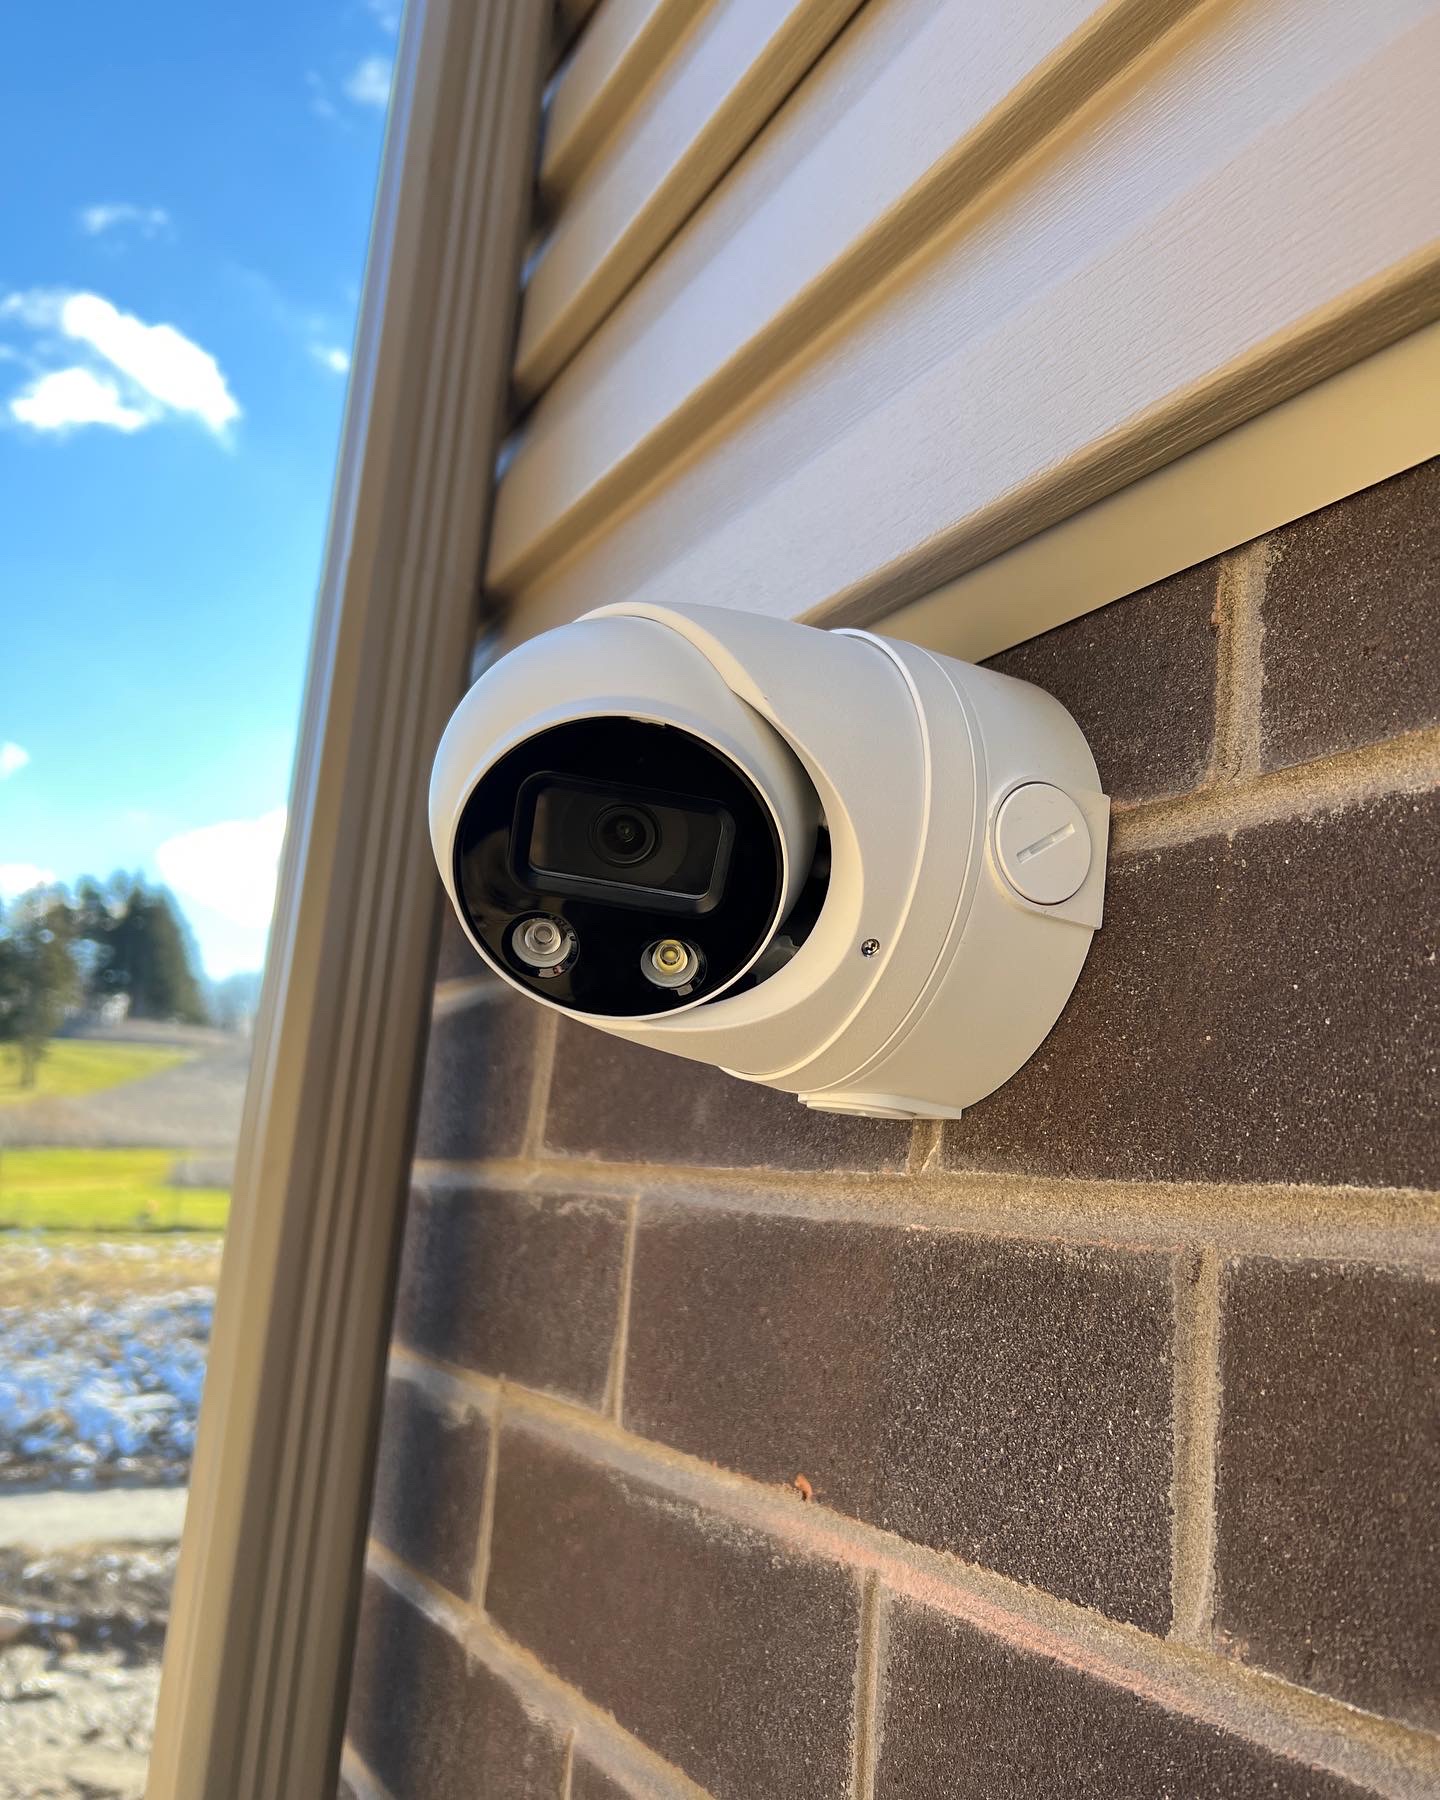 4K IP Turret Security Camera with Active Deterrent LED installed on Brick